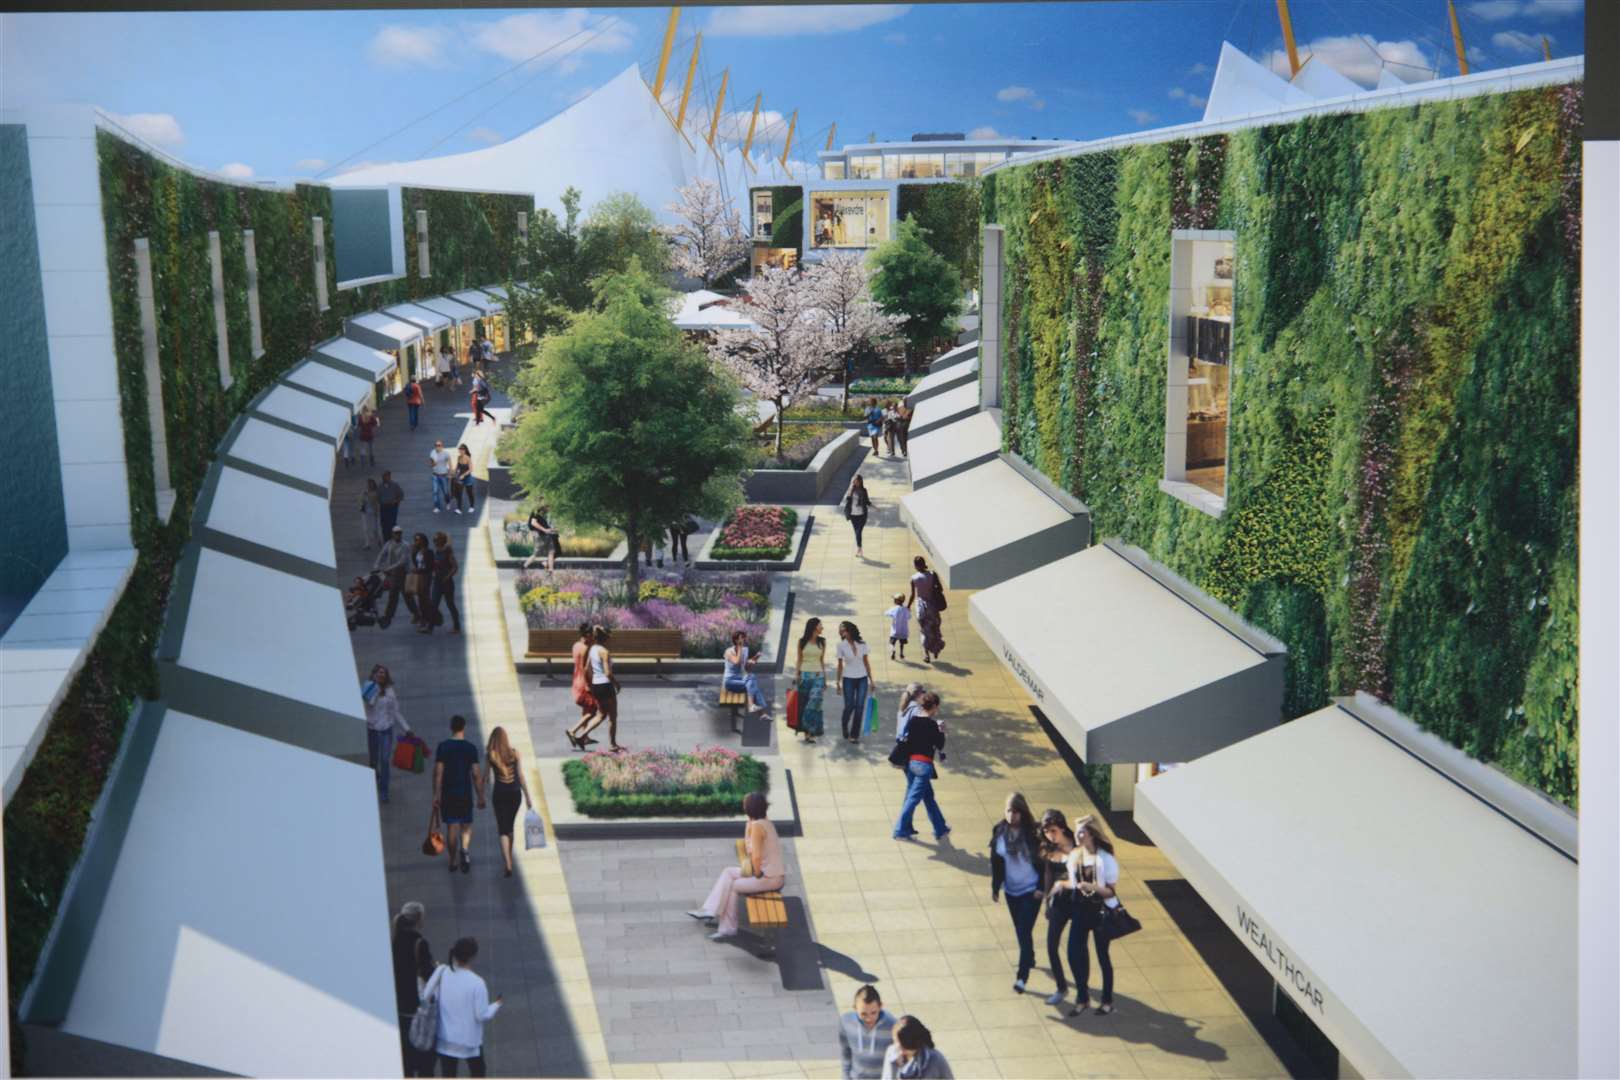 An artist's impression how an expanded Ashford Designer Outlet will look